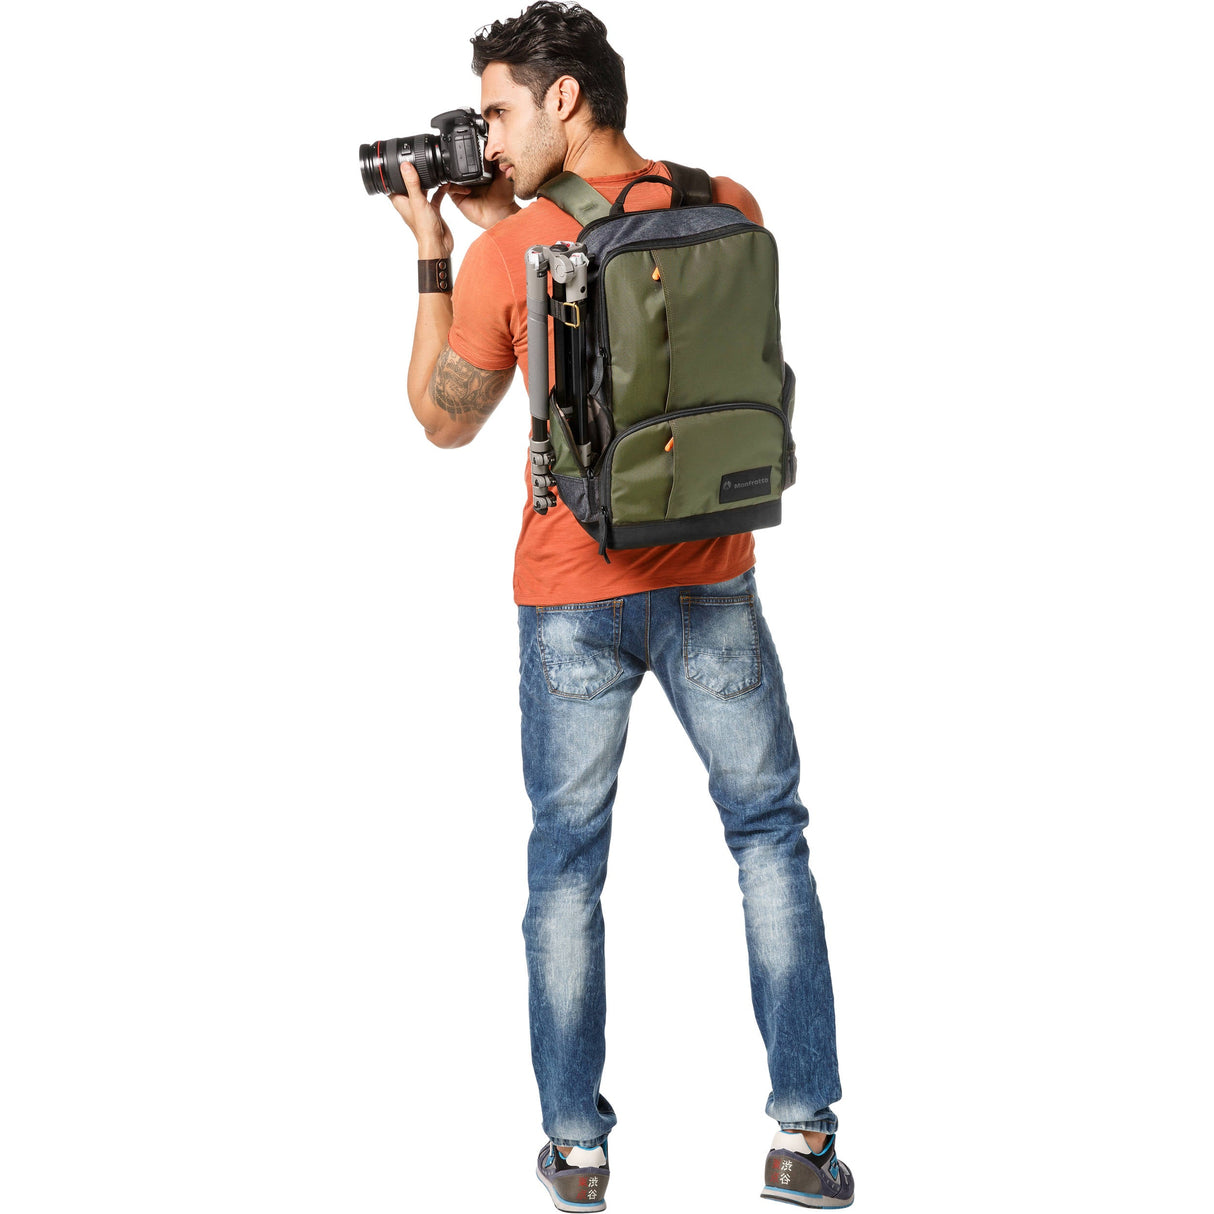 Manfrotto Street Camera and Laptop Backpack for DSLR/CSC (Green and Gray)